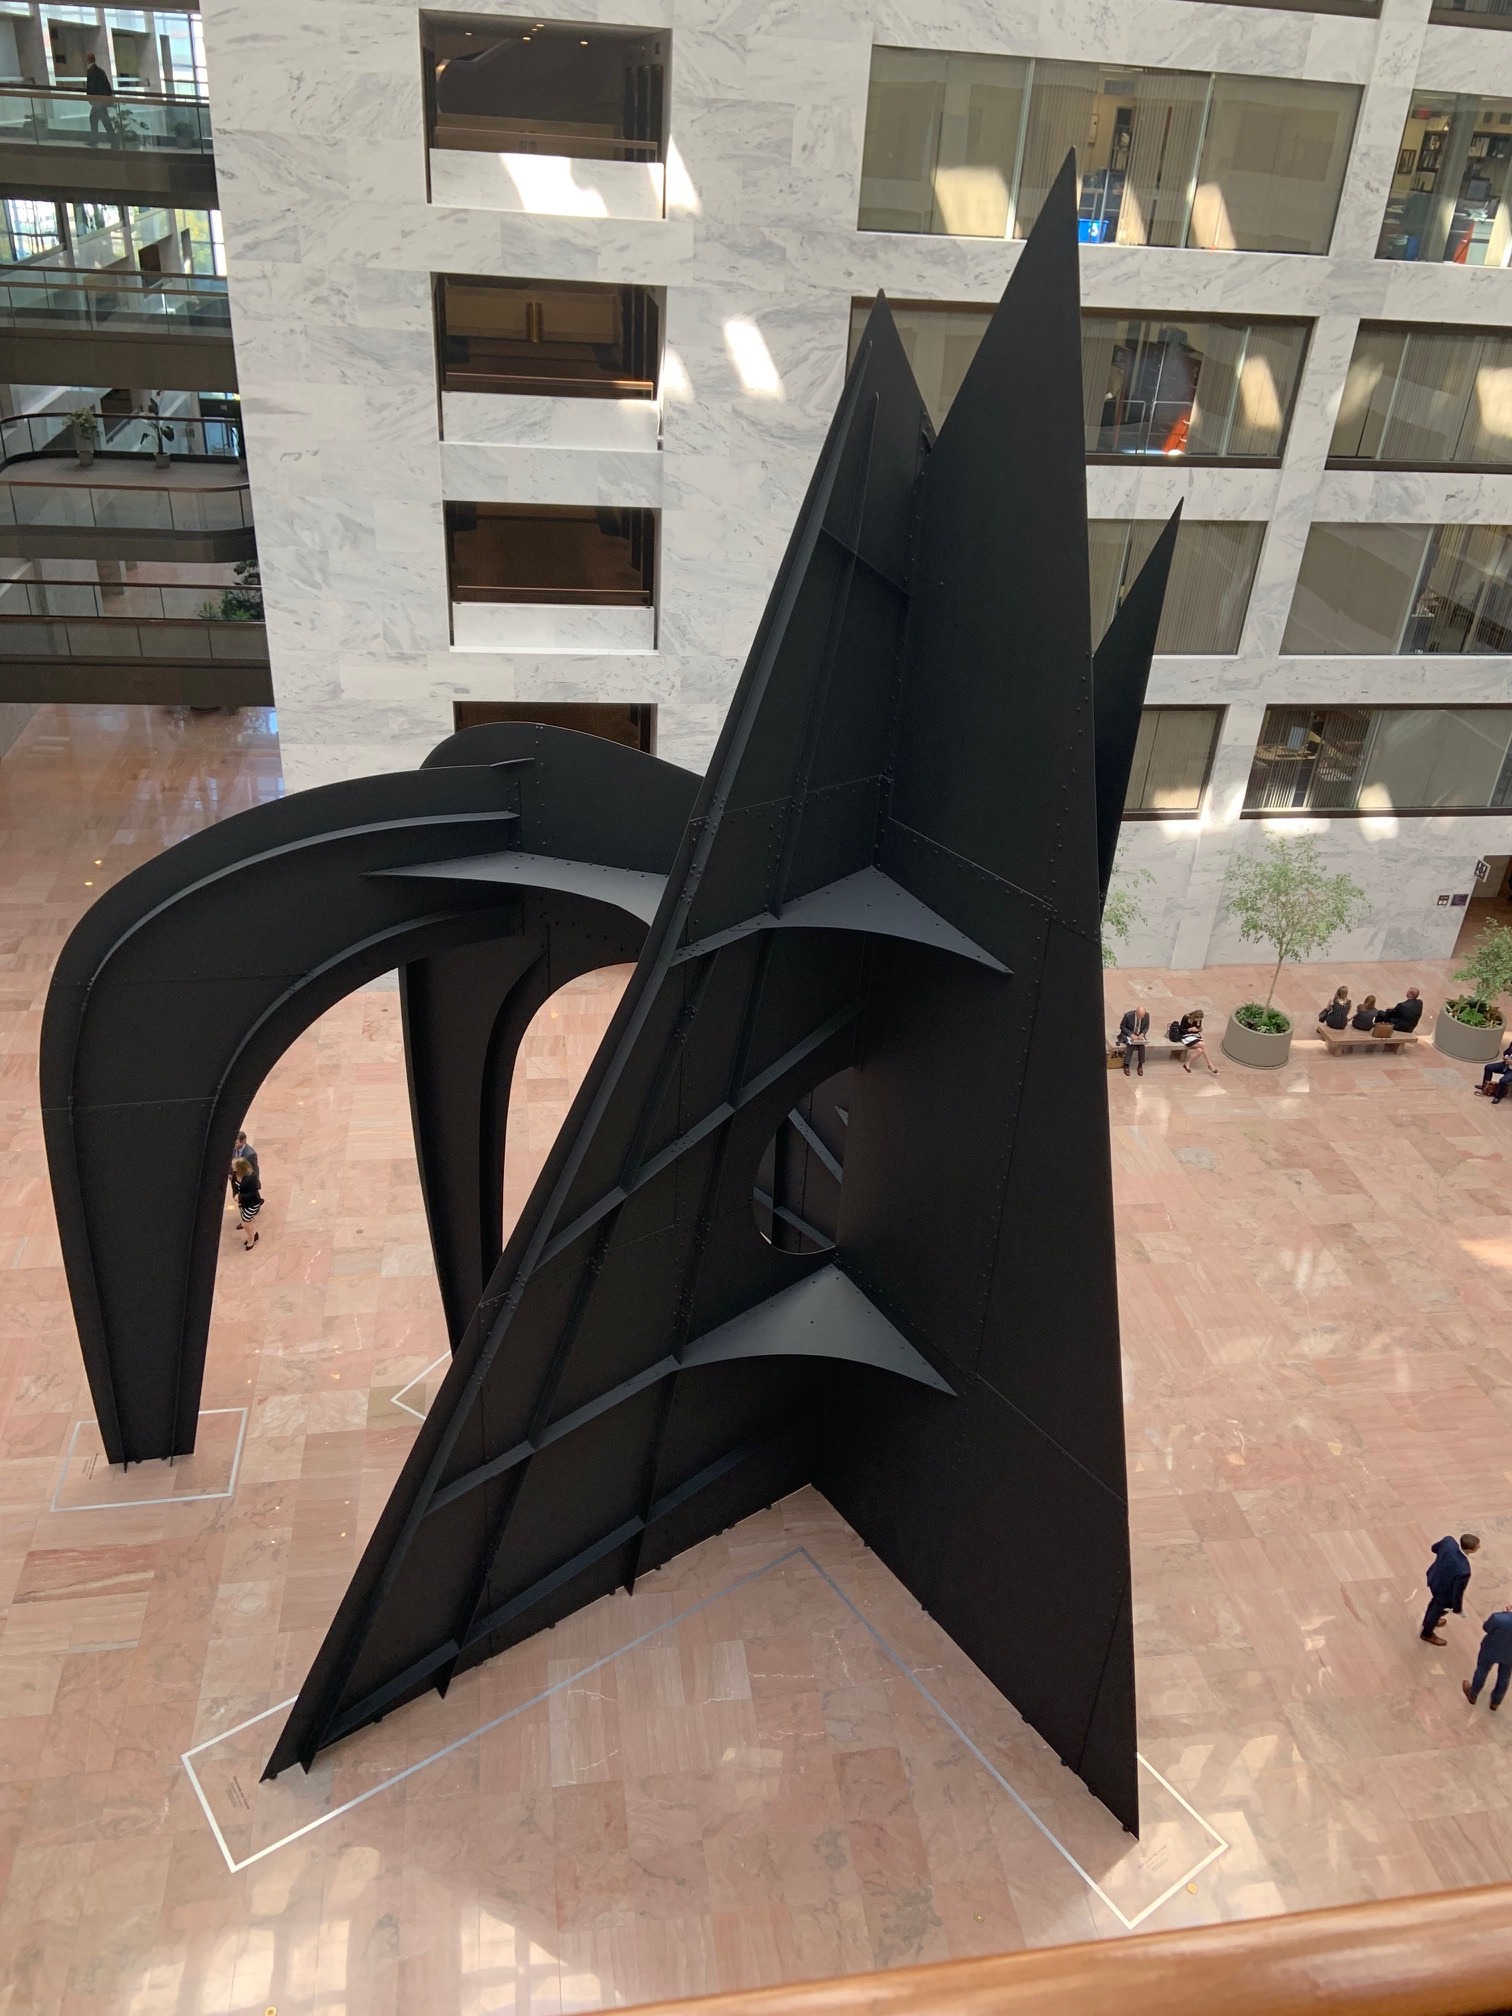 Mountain and Clouds by Alexander Calder in Hart Senate Office Building